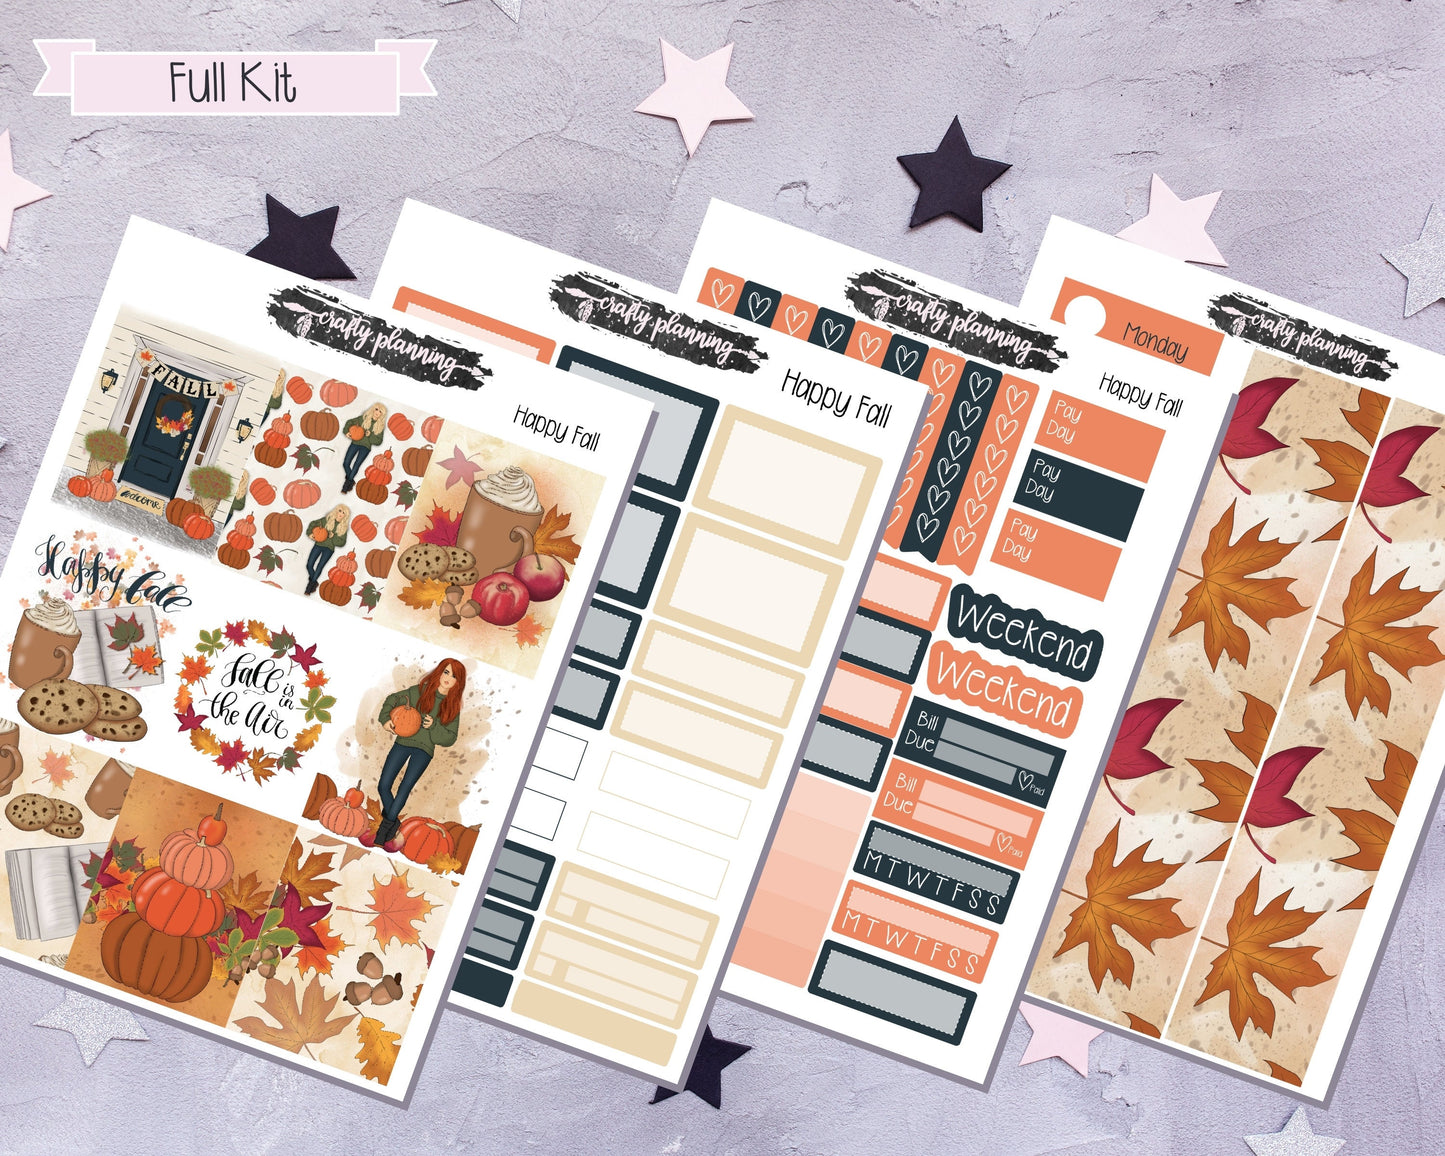 Happy Fall Weekly Planner Kit, Autumn Weekly Planner Kit, Autumn Planner Kit, Fall Planner Kit, Pumpkins, Coffee, Autumn Leaves